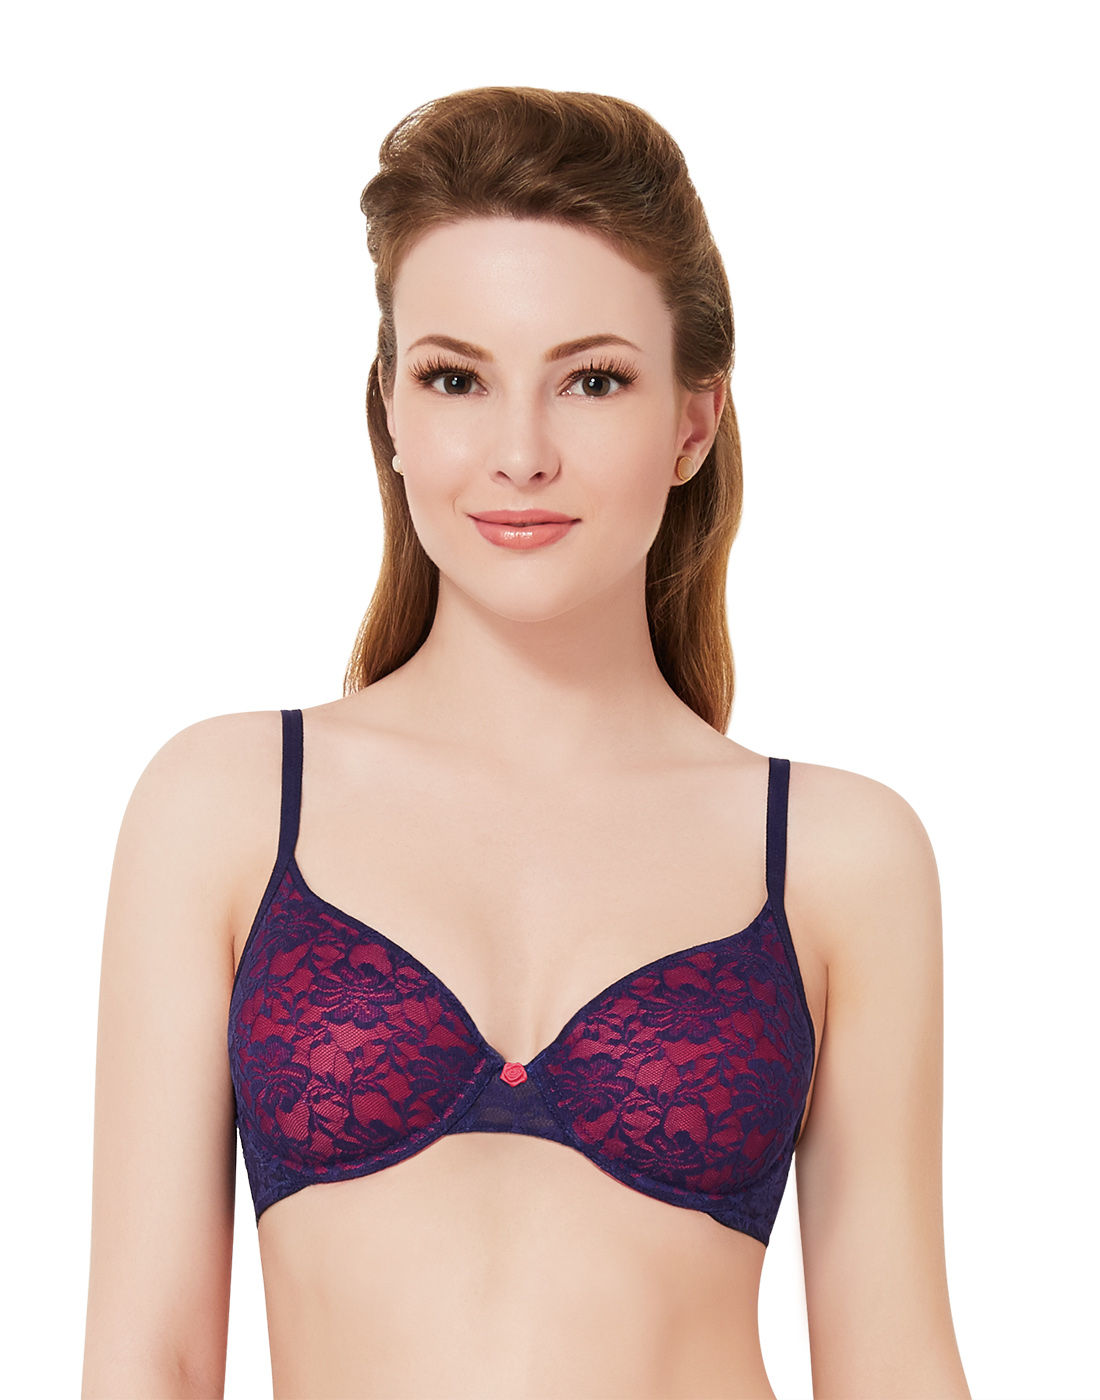 Amante Floral Romance Padded Wired Neon Pink and Blue T-Shirt Bra (36B)